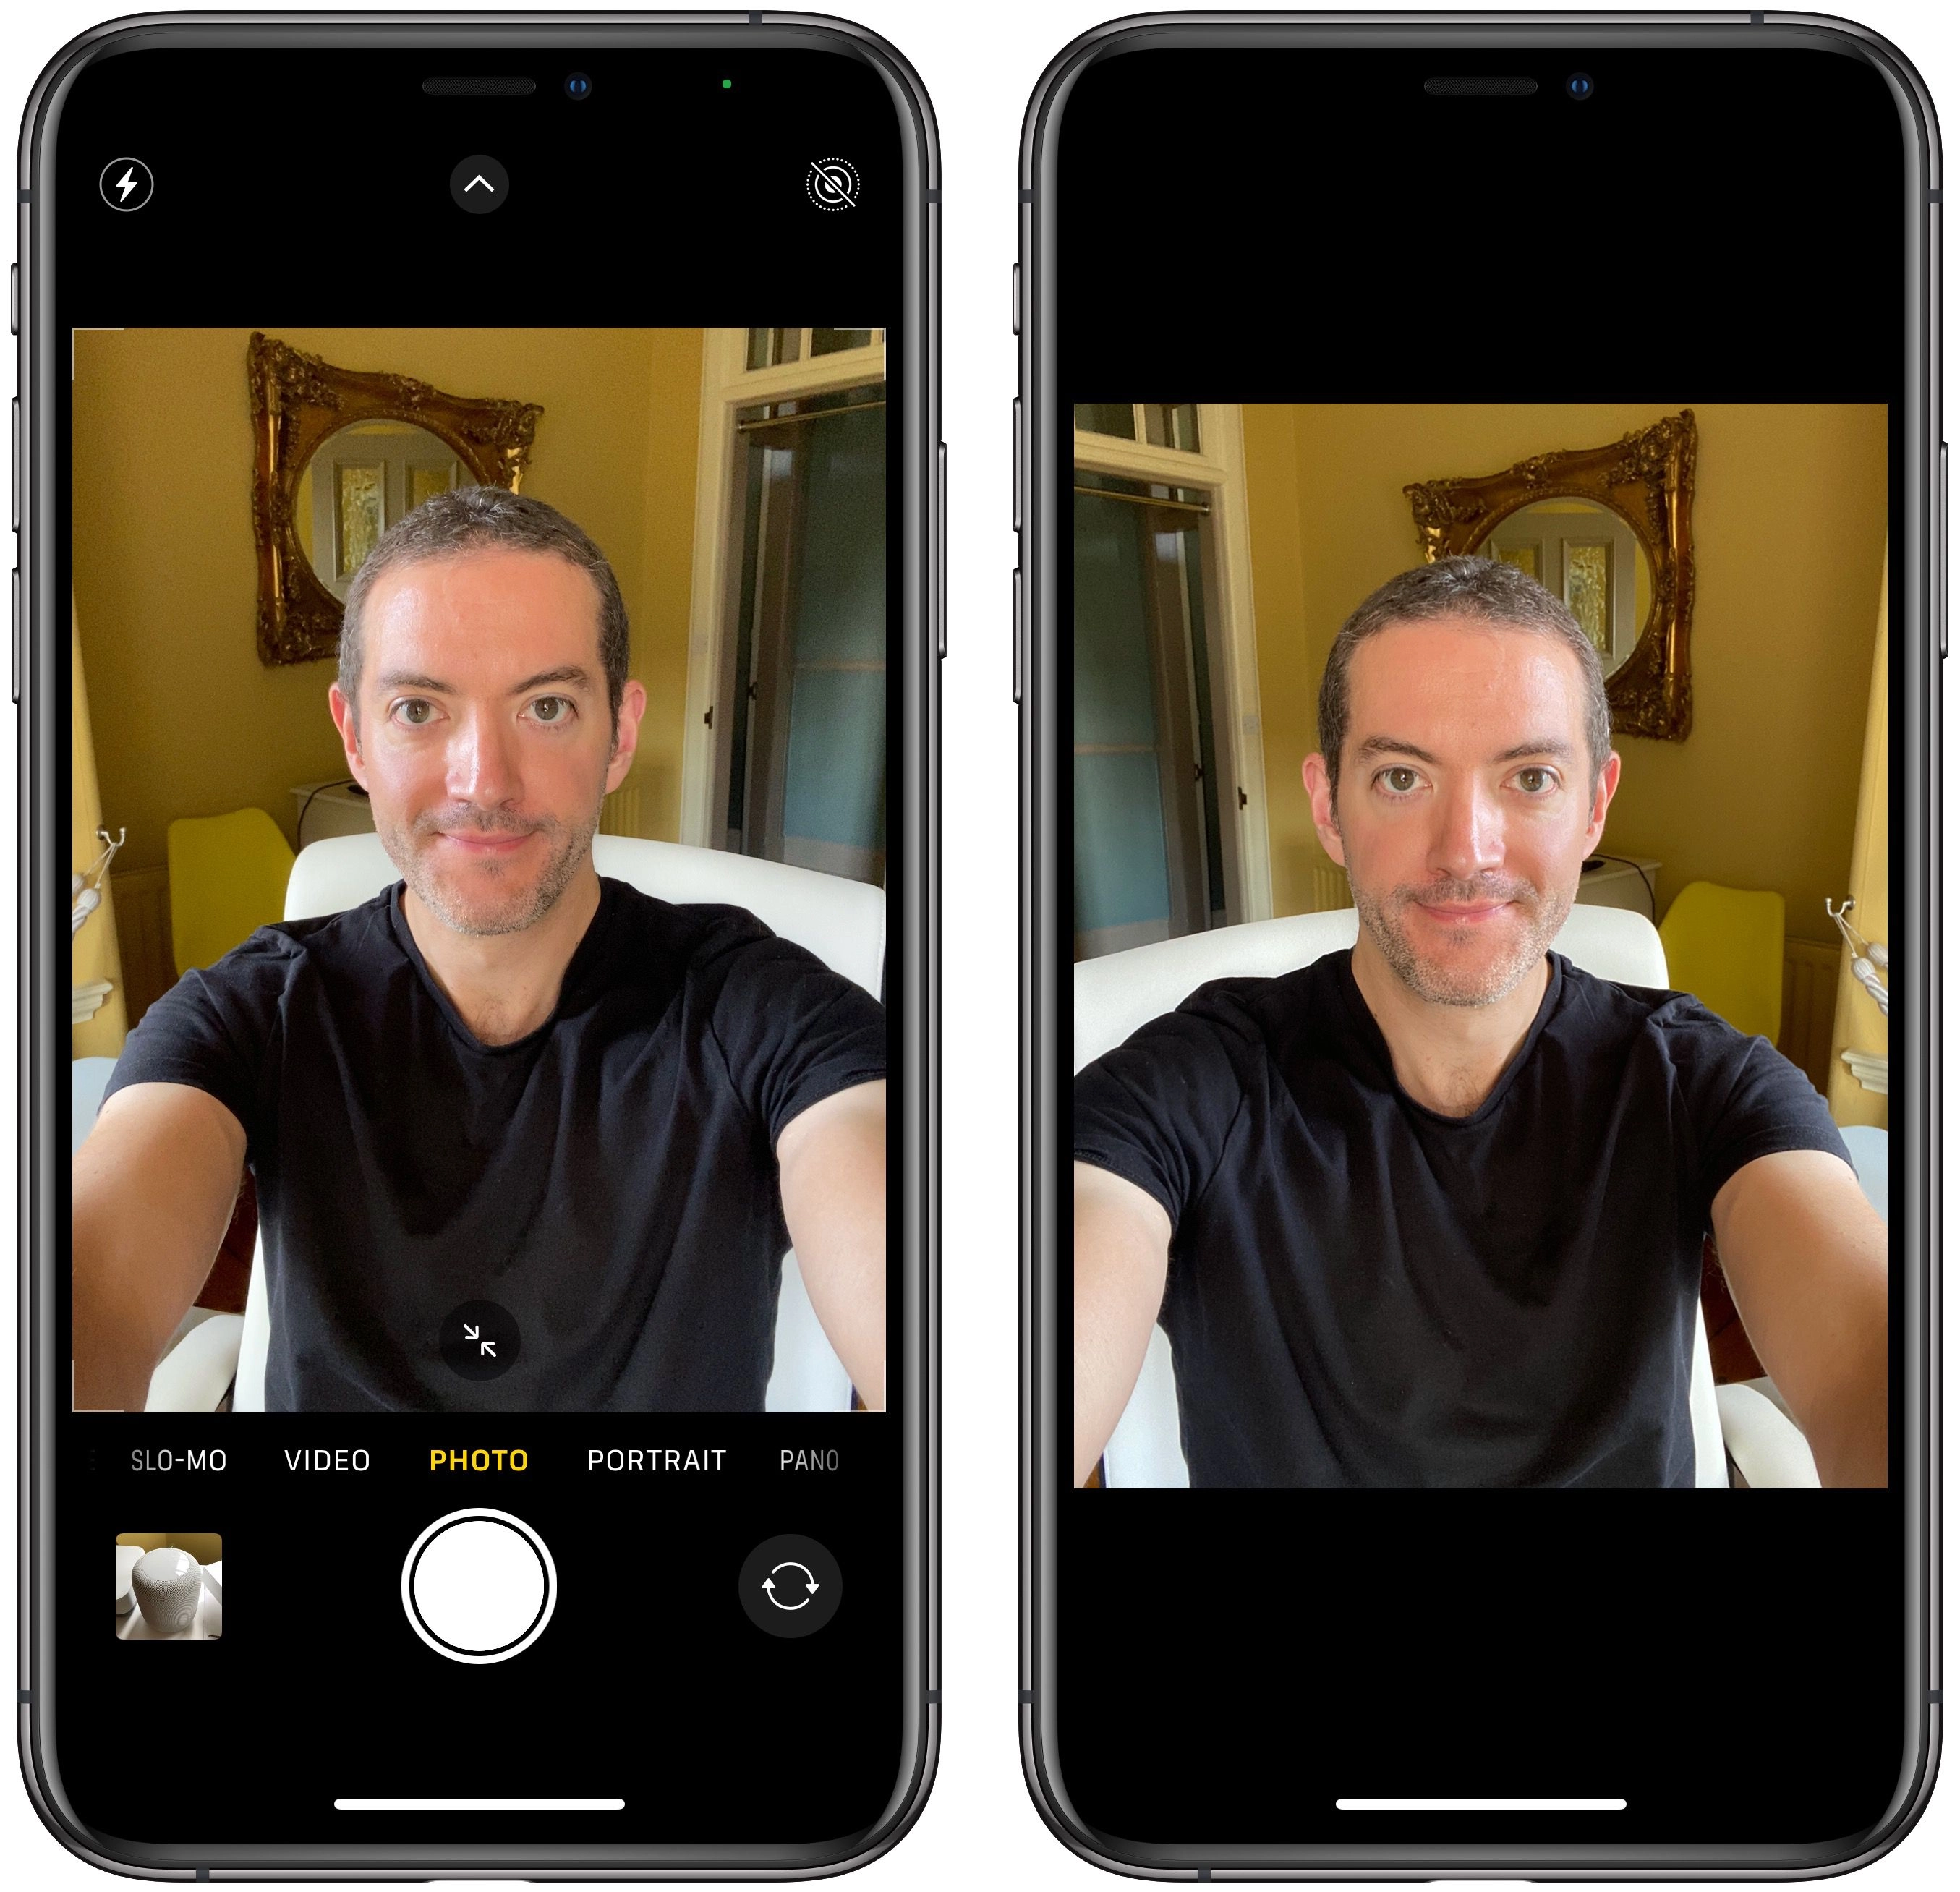 Common causes of rotated front camera photos